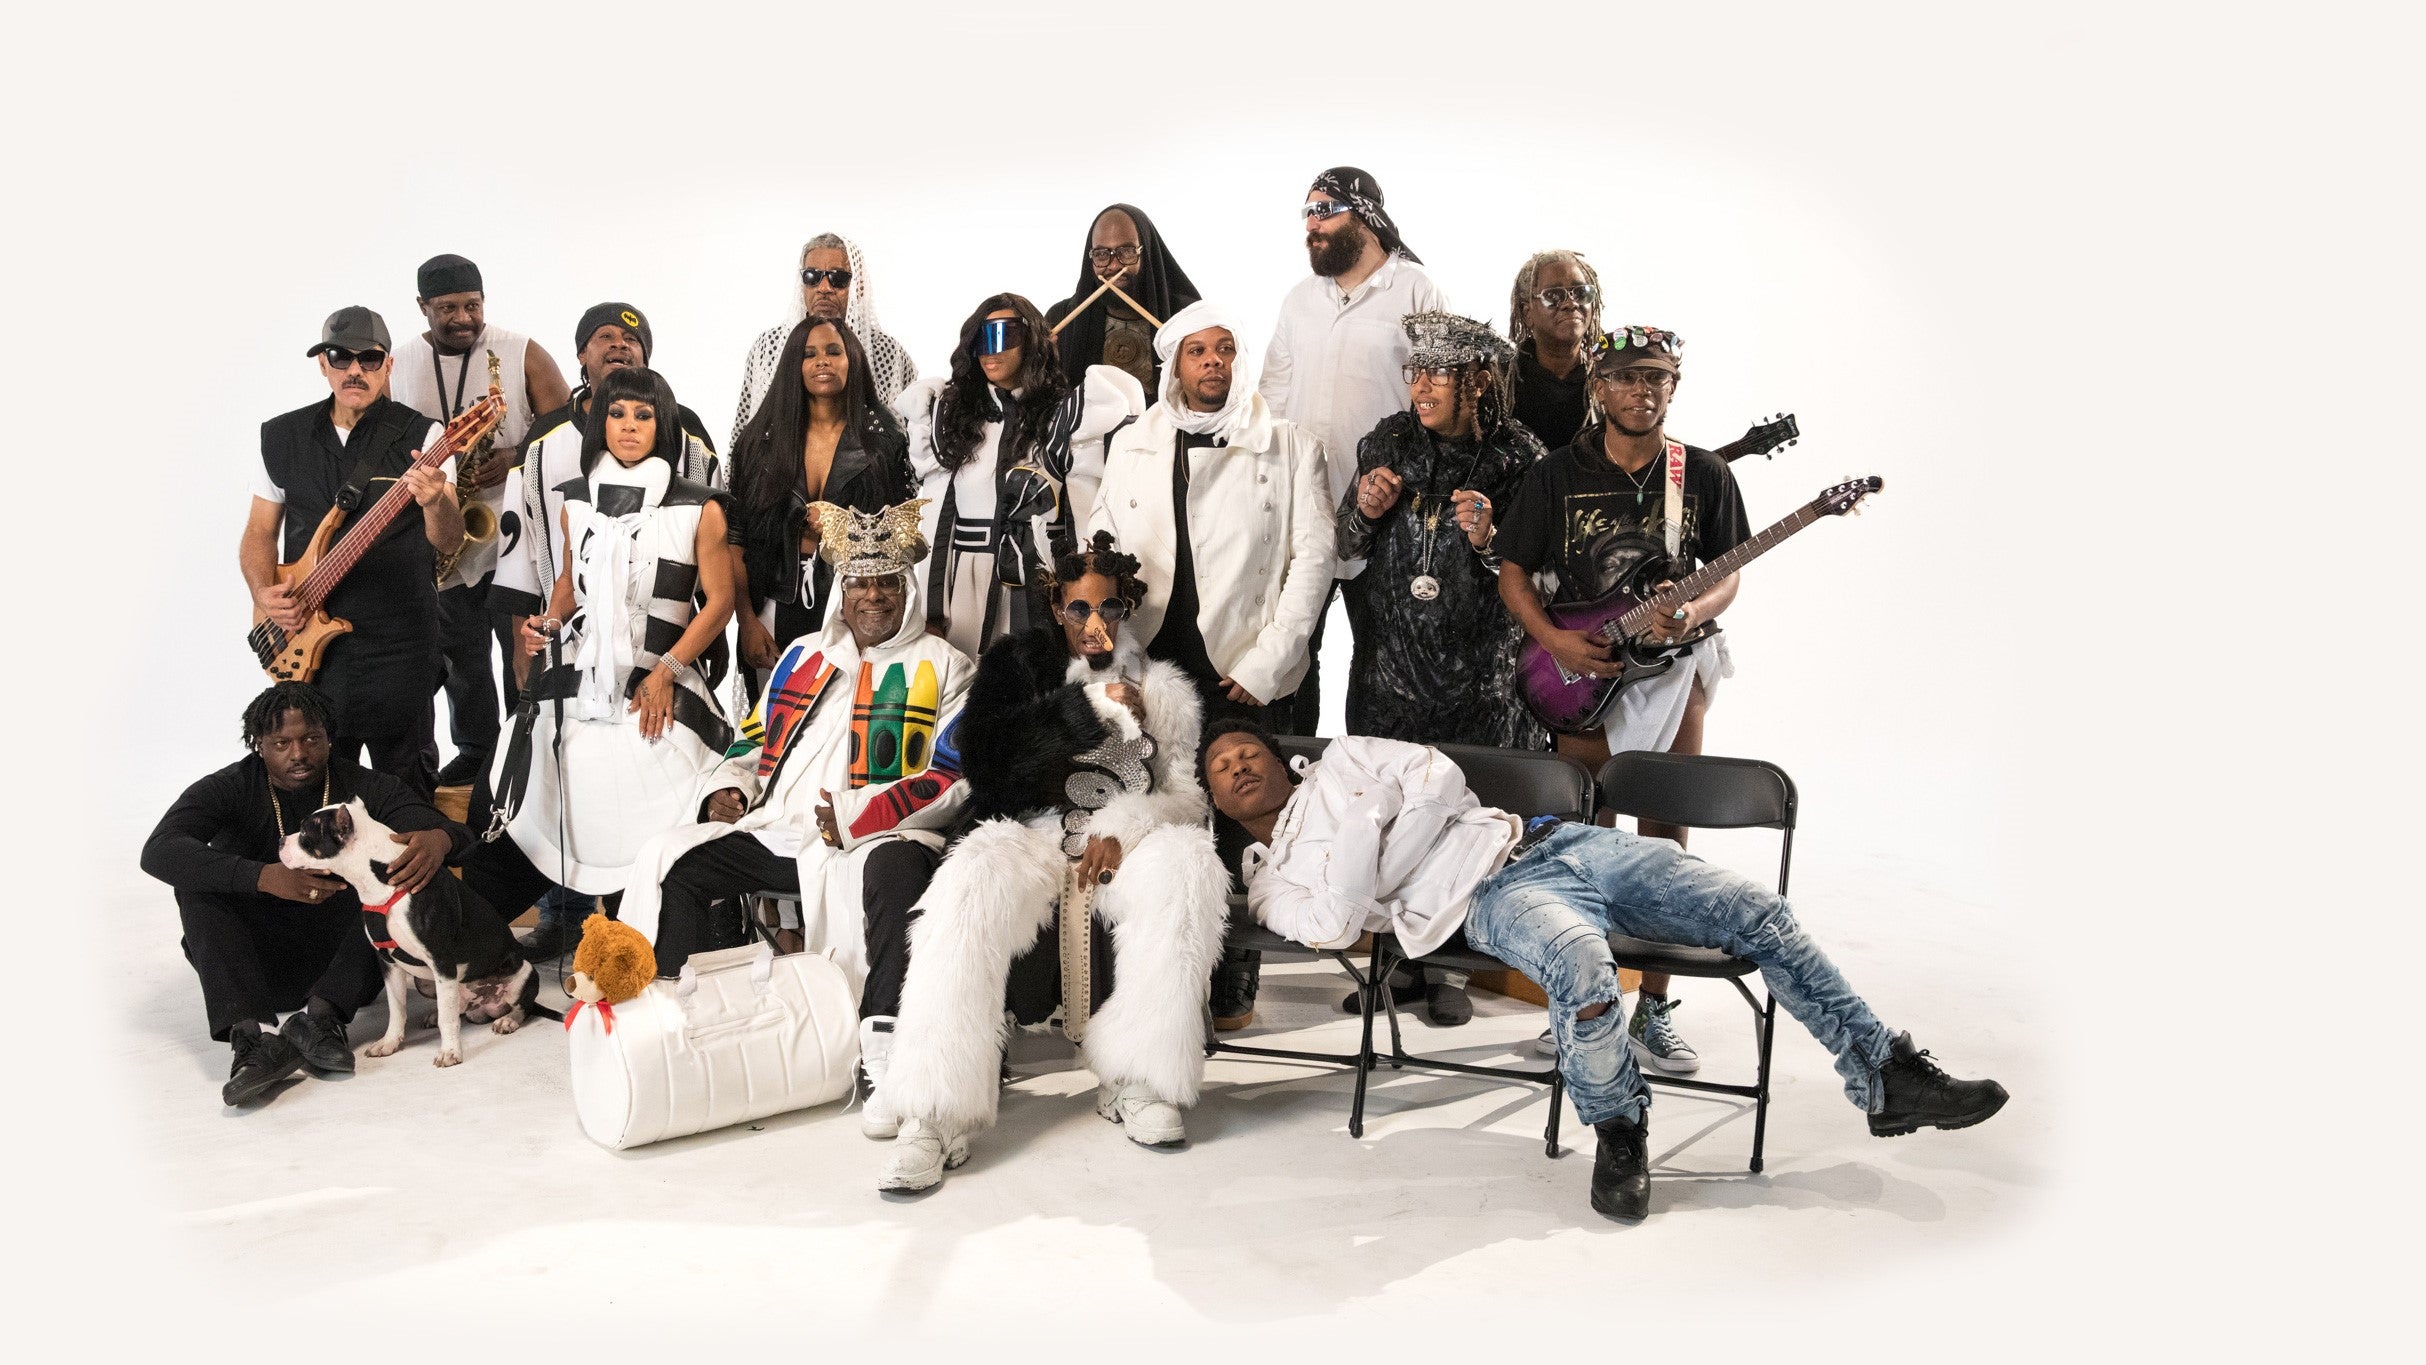 Parliament Funkadelic feat. George Clinton presale password for show tickets in Carnation, WA (Remlinger Farms)